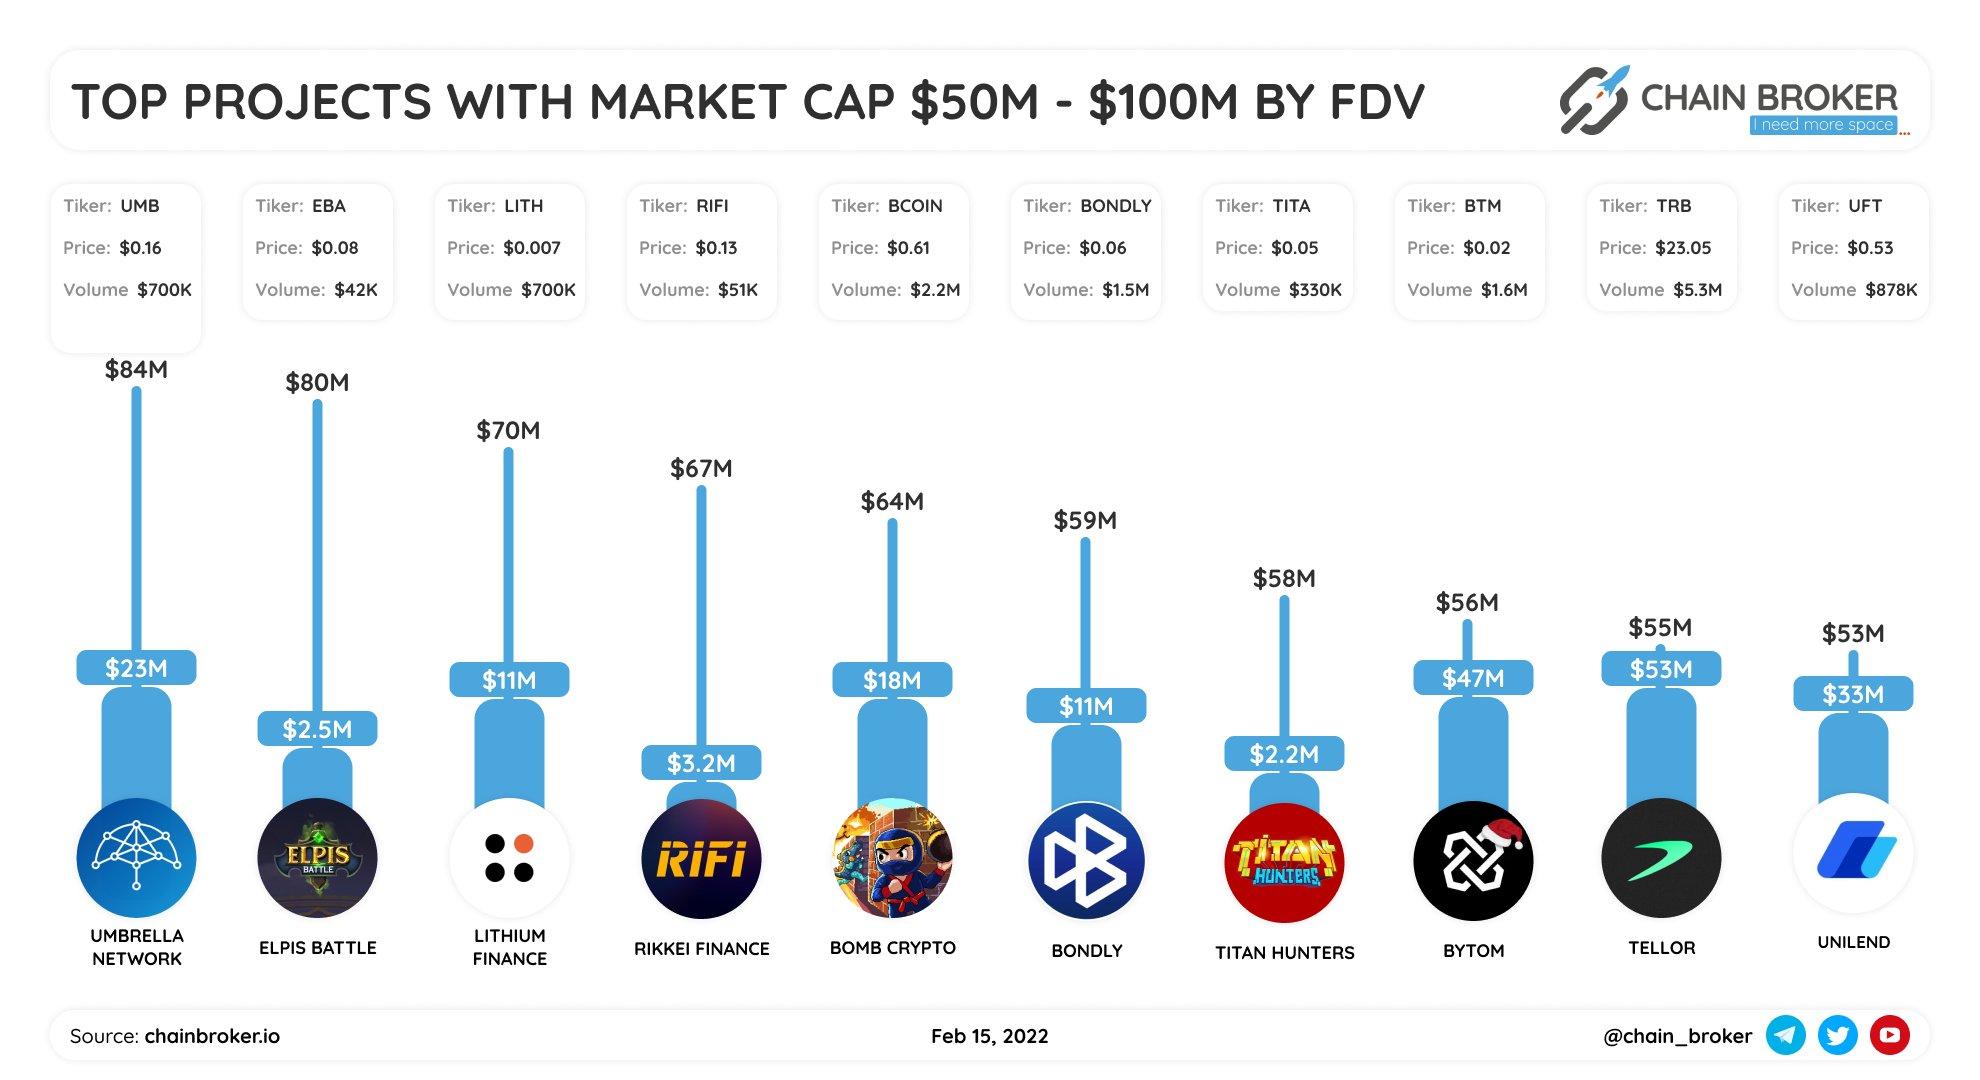 Top projects with market cap $50M-$100M ranged by FDV